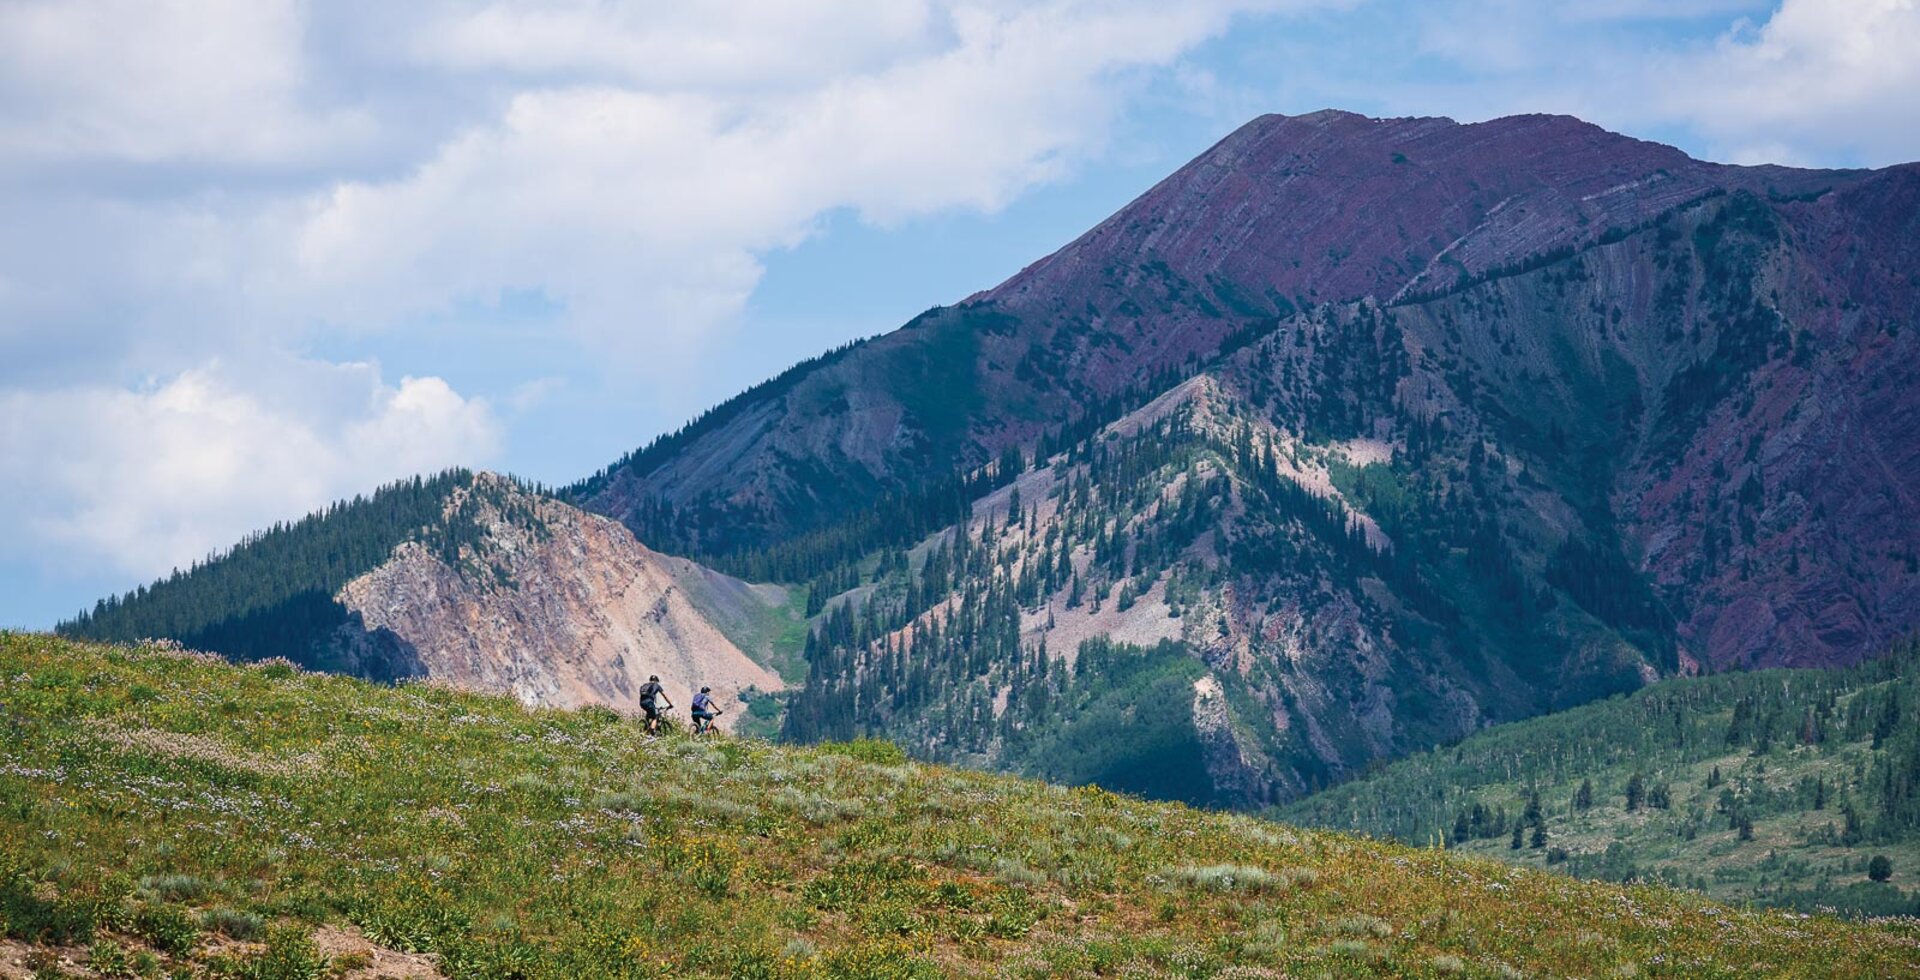 One of a few fun rides around Crested Butte, Colorado before heading on to Silverton. Our spirits were high on the way back to camp after a nice flowy ride—the kind where the scenery blurs and the smiles grow wide.